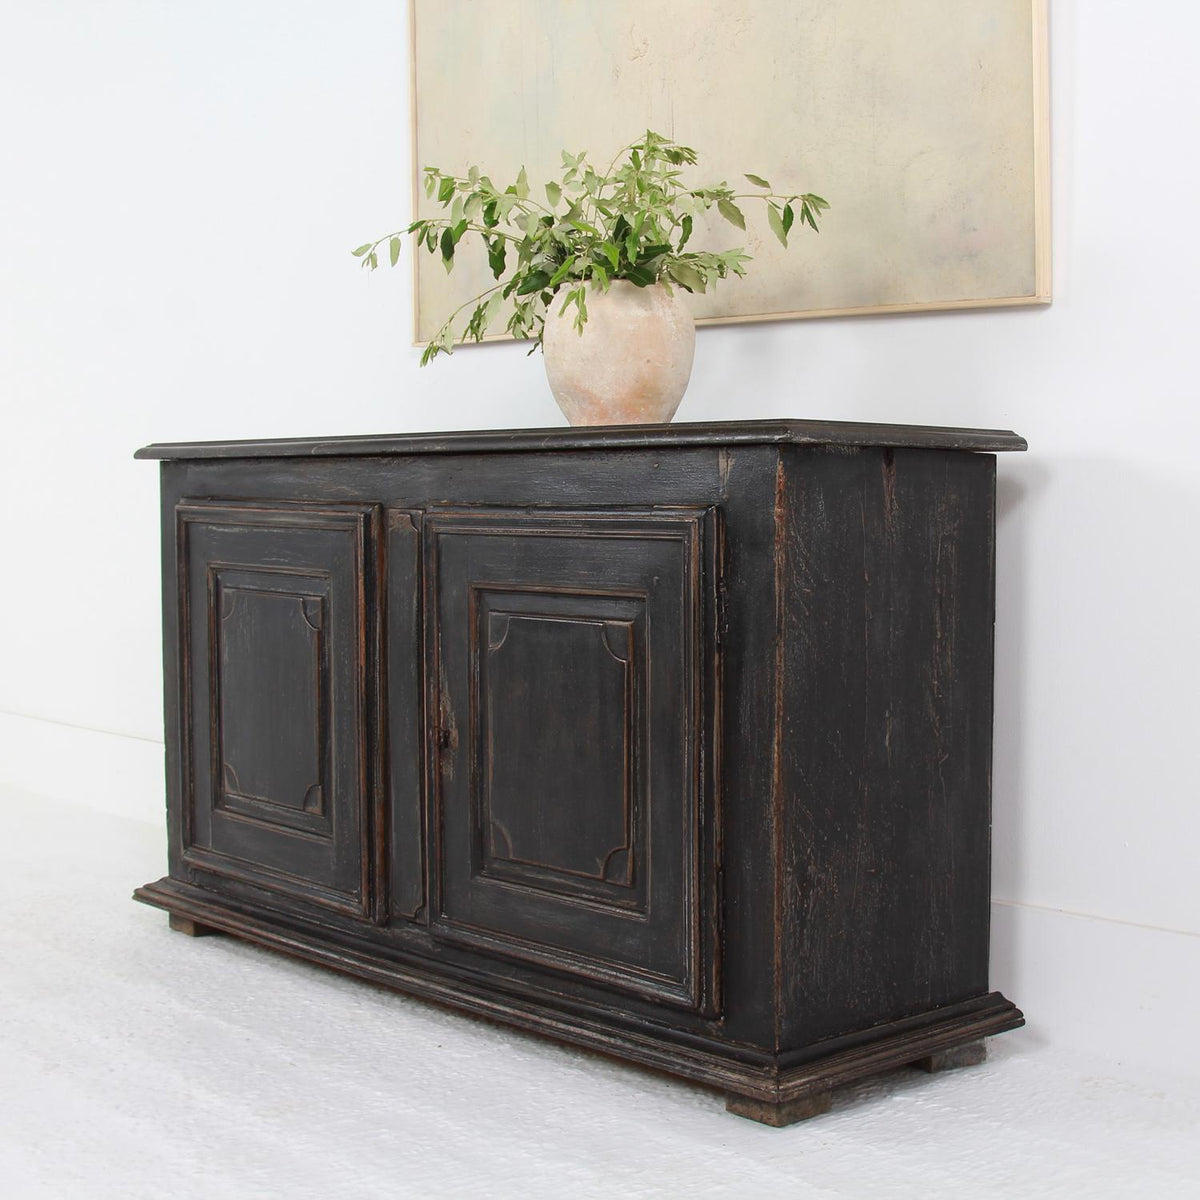 Striking Grand Italian  19thC Black Painted Two-Door Buffet with Marble Top